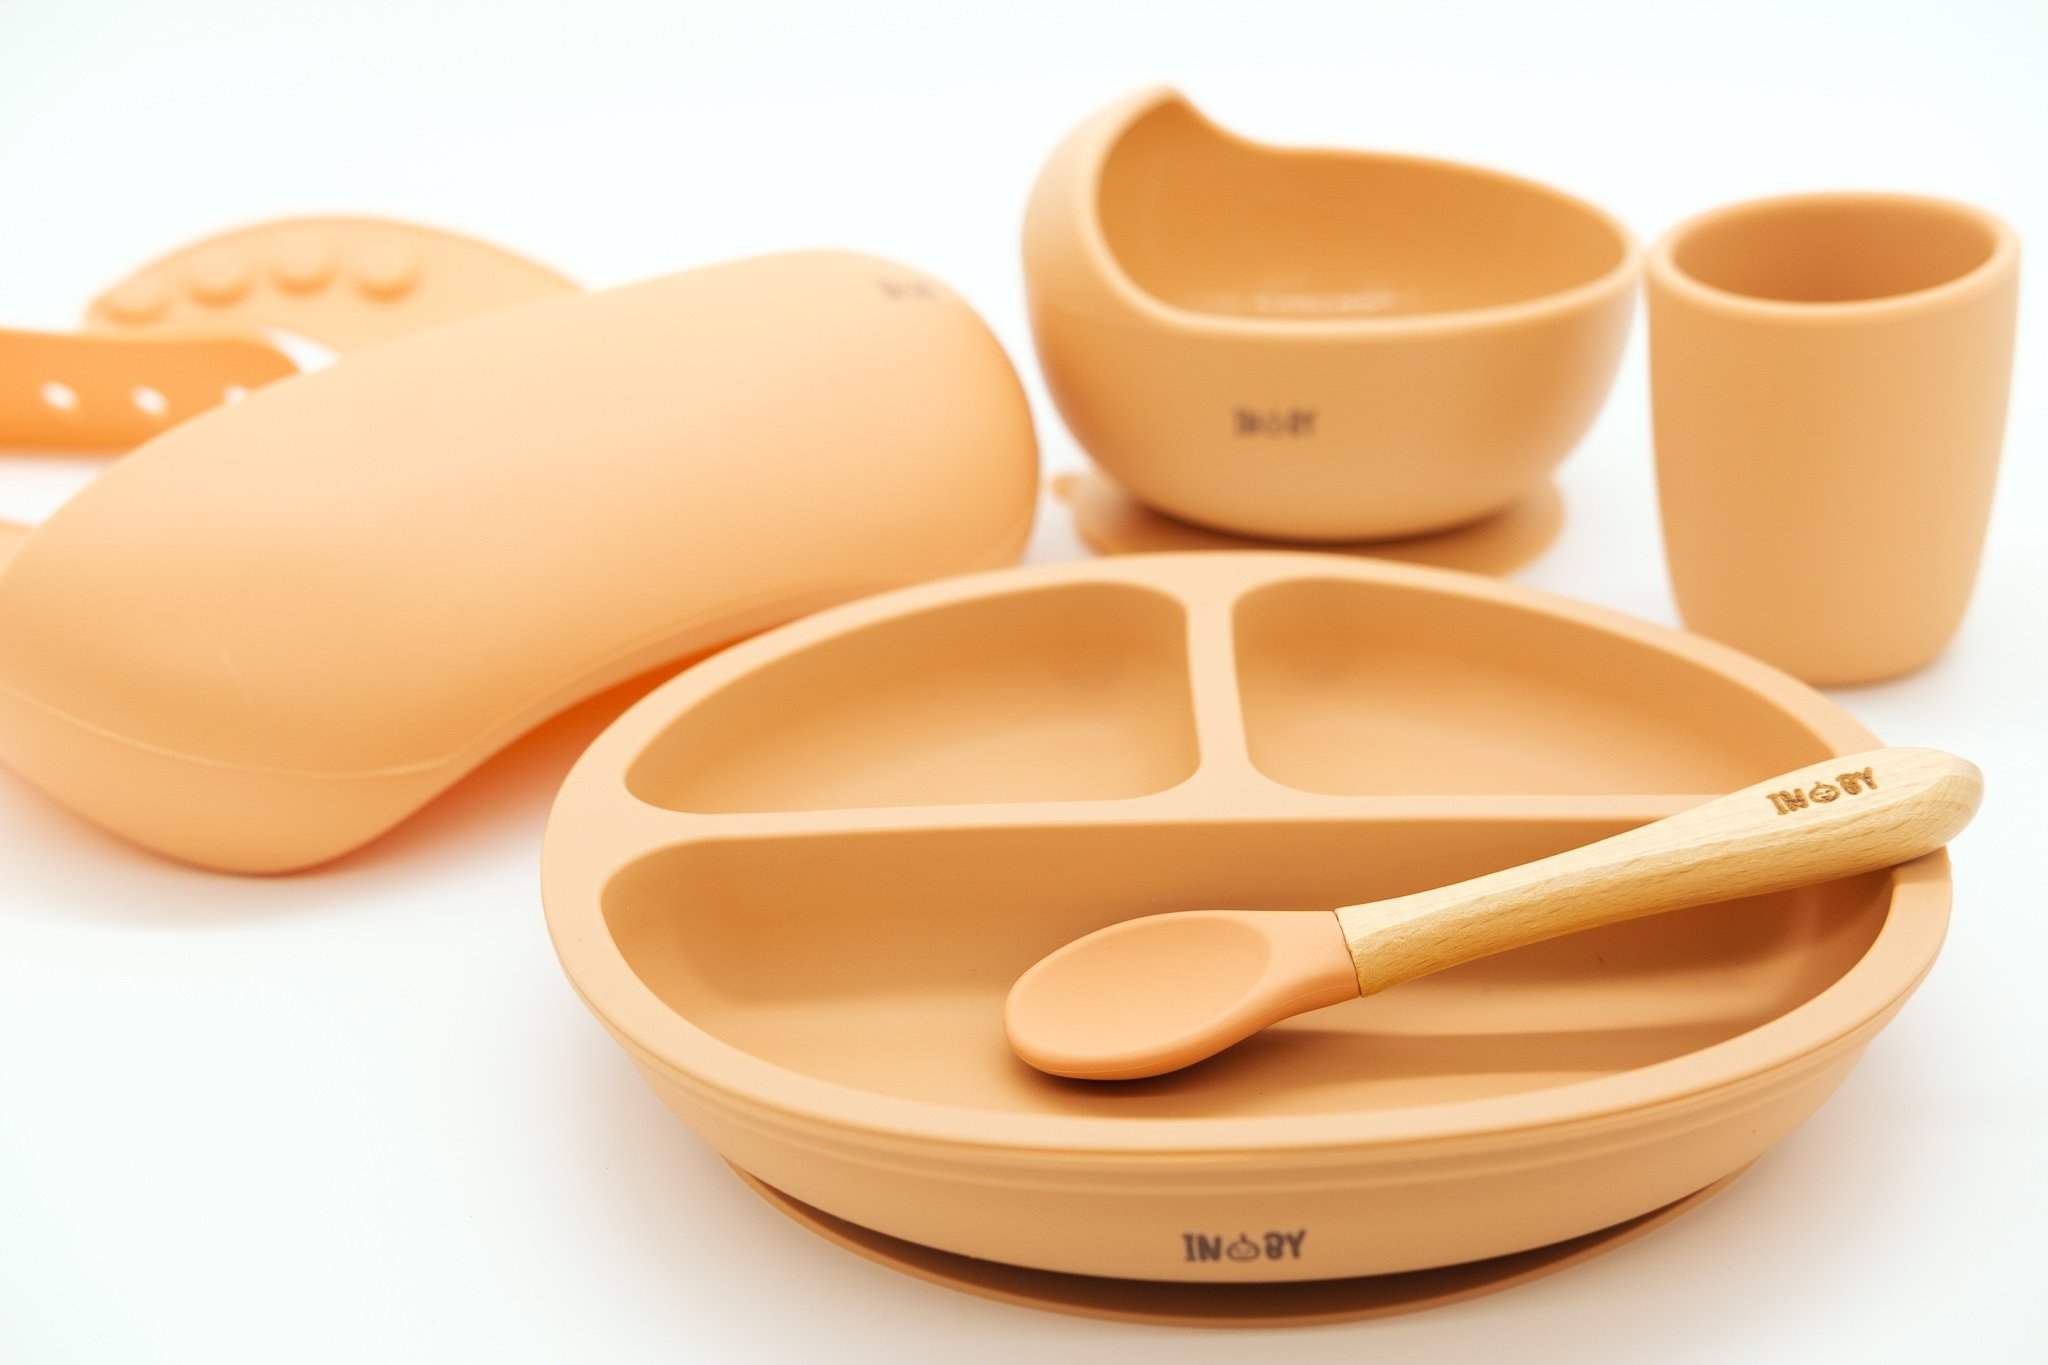 Baby Weaning Set | Silicone Weaning Kit | Buy Online | UK | Inoby Apricot